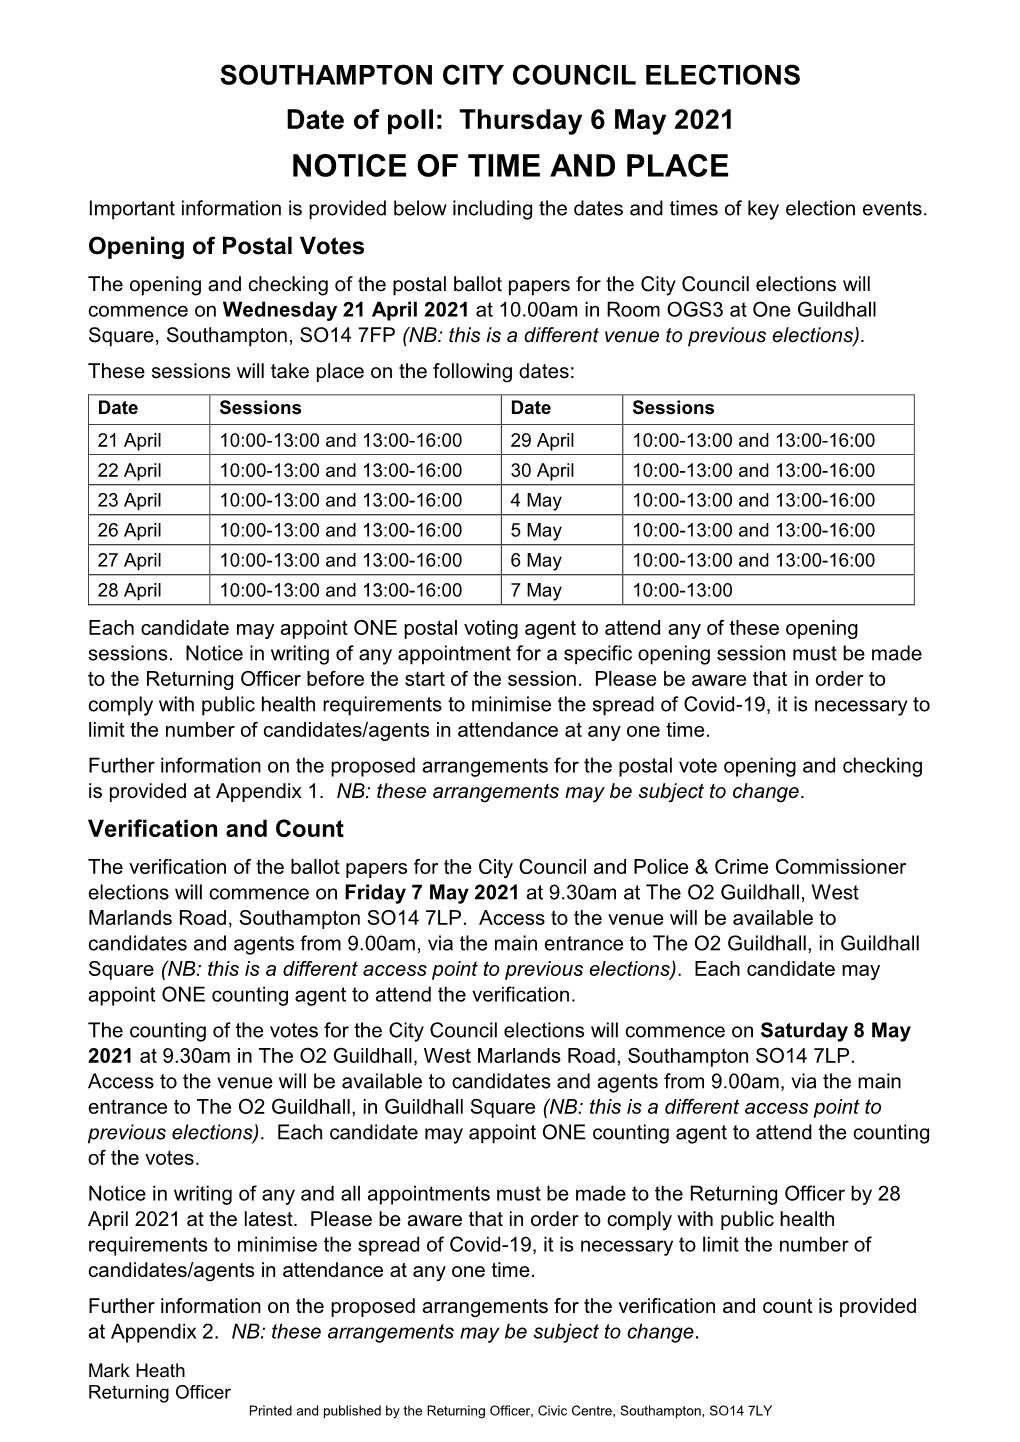 NOTICE of TIME and PLACE Important Information Is Provided Below Including the Dates and Times of Key Election Events